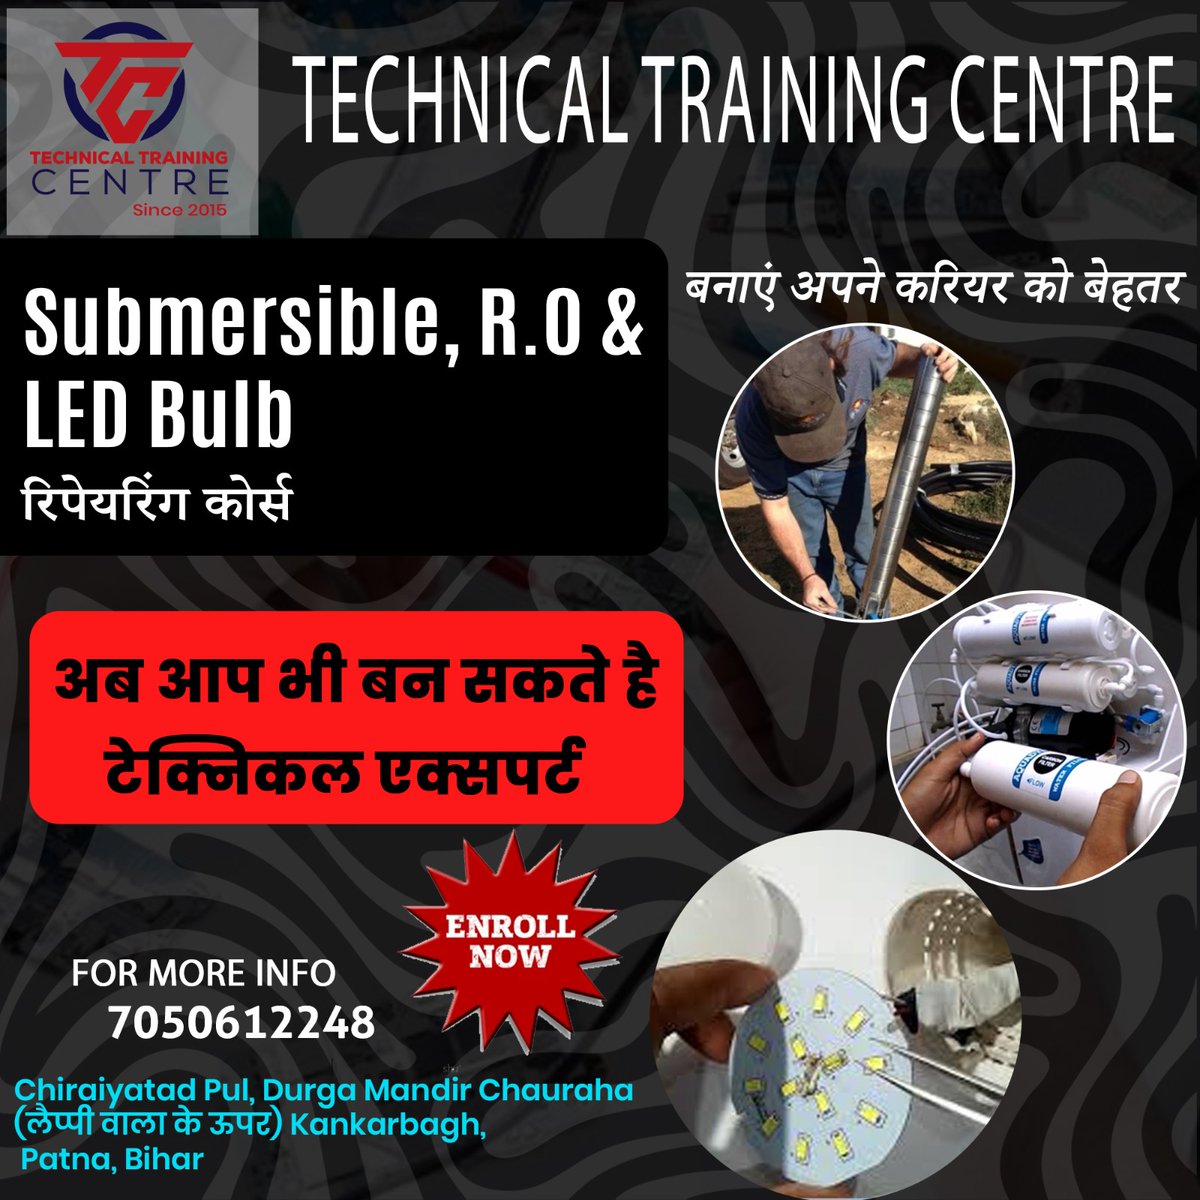 Technical Training Centre

Gain hands-on experience and technical expertise in repairing and maintaining RO systems and submersible equipment💪 

#ROrepair  #itiexperts  #technician  #technicalknowledge  #technicaltraining  #traininginstitute  #trainingcentre